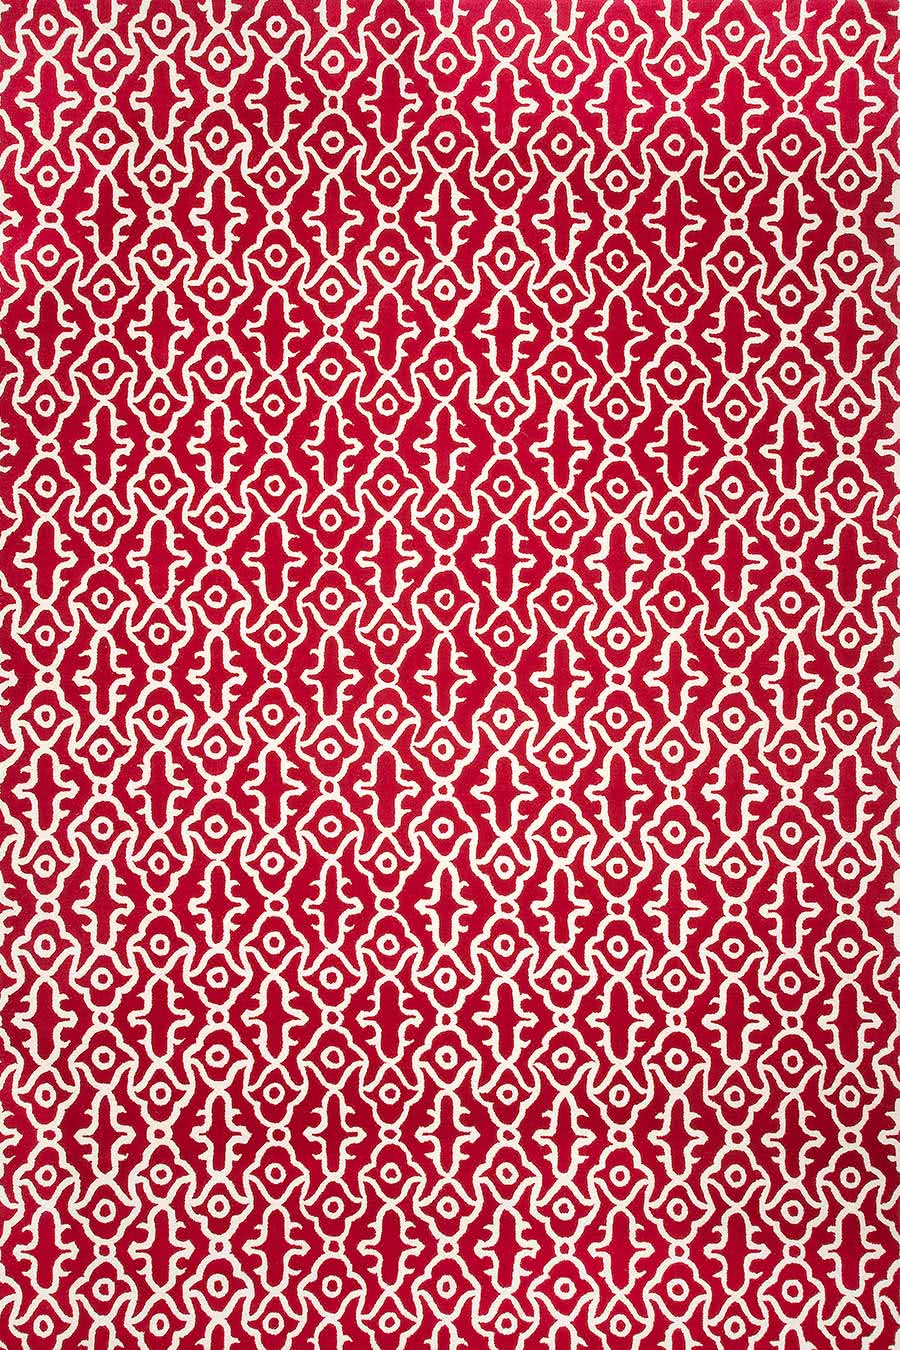 Detailed view of our patterned Morooco rug design in stunning red with white lines.